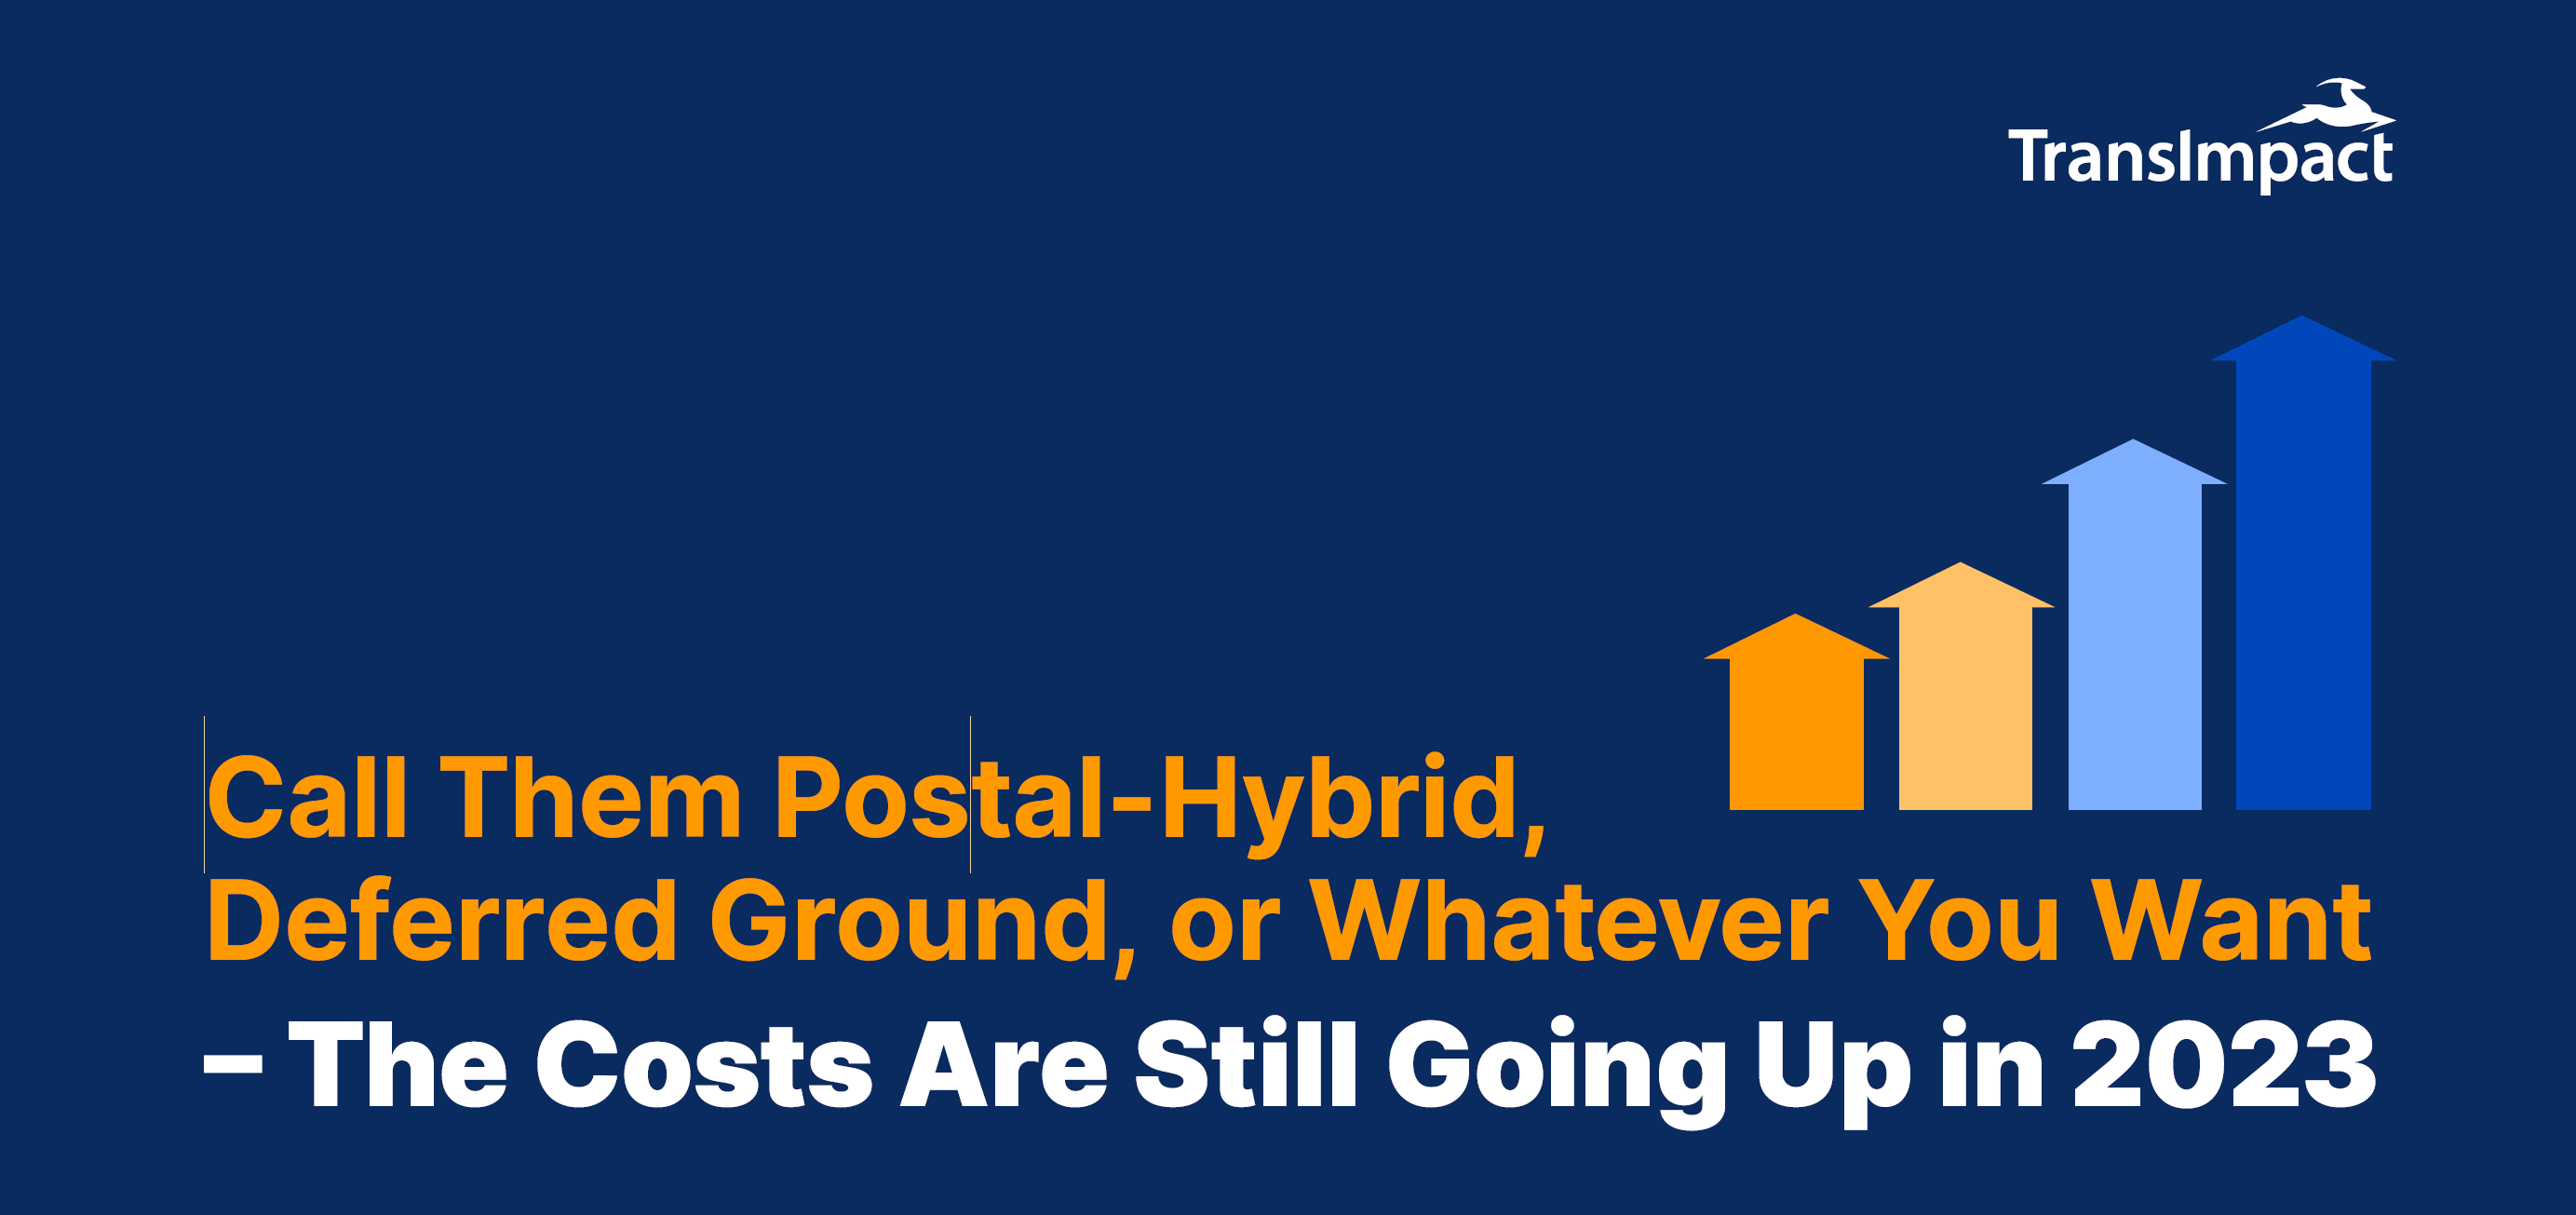 Call Them Postal-Hybrid, Deferred Ground, or Whatever You Want — The Costs Are Still Going Up in 2023